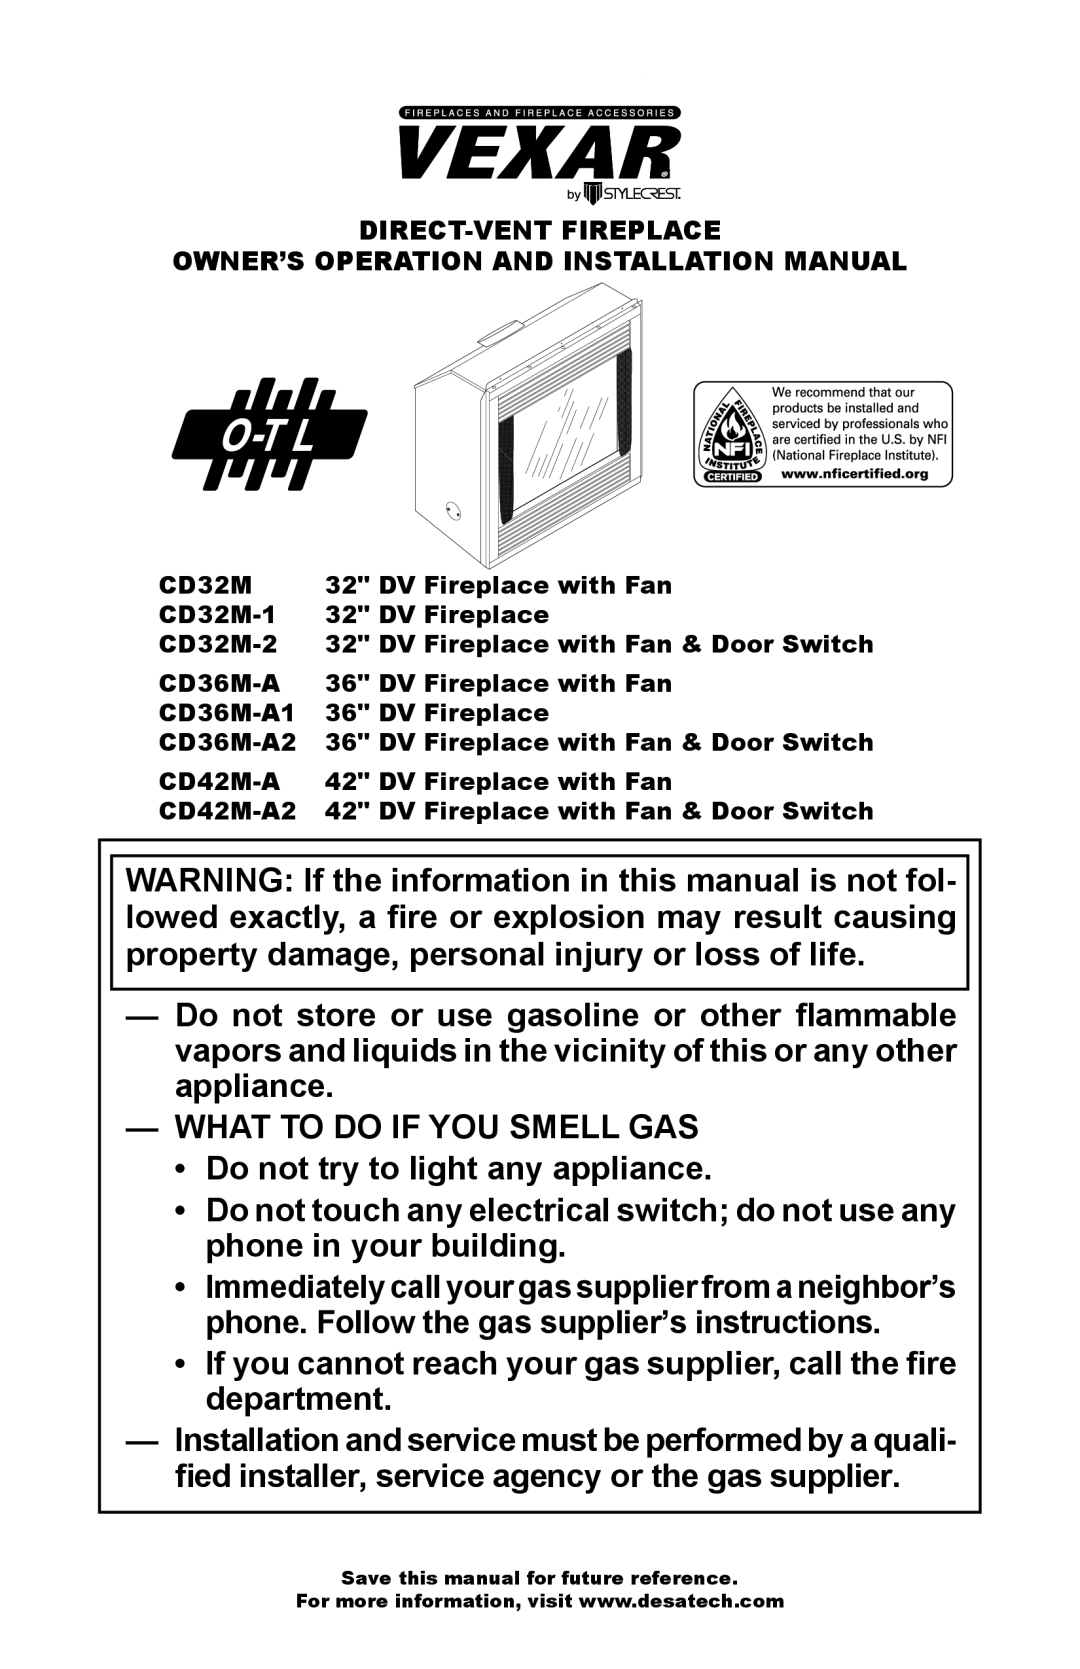 Desa CD36M-A1, CD32M-2, CD36M-A2, CD42M-A2, CD32M-1 installation manual What To Do If You Smell Gas 